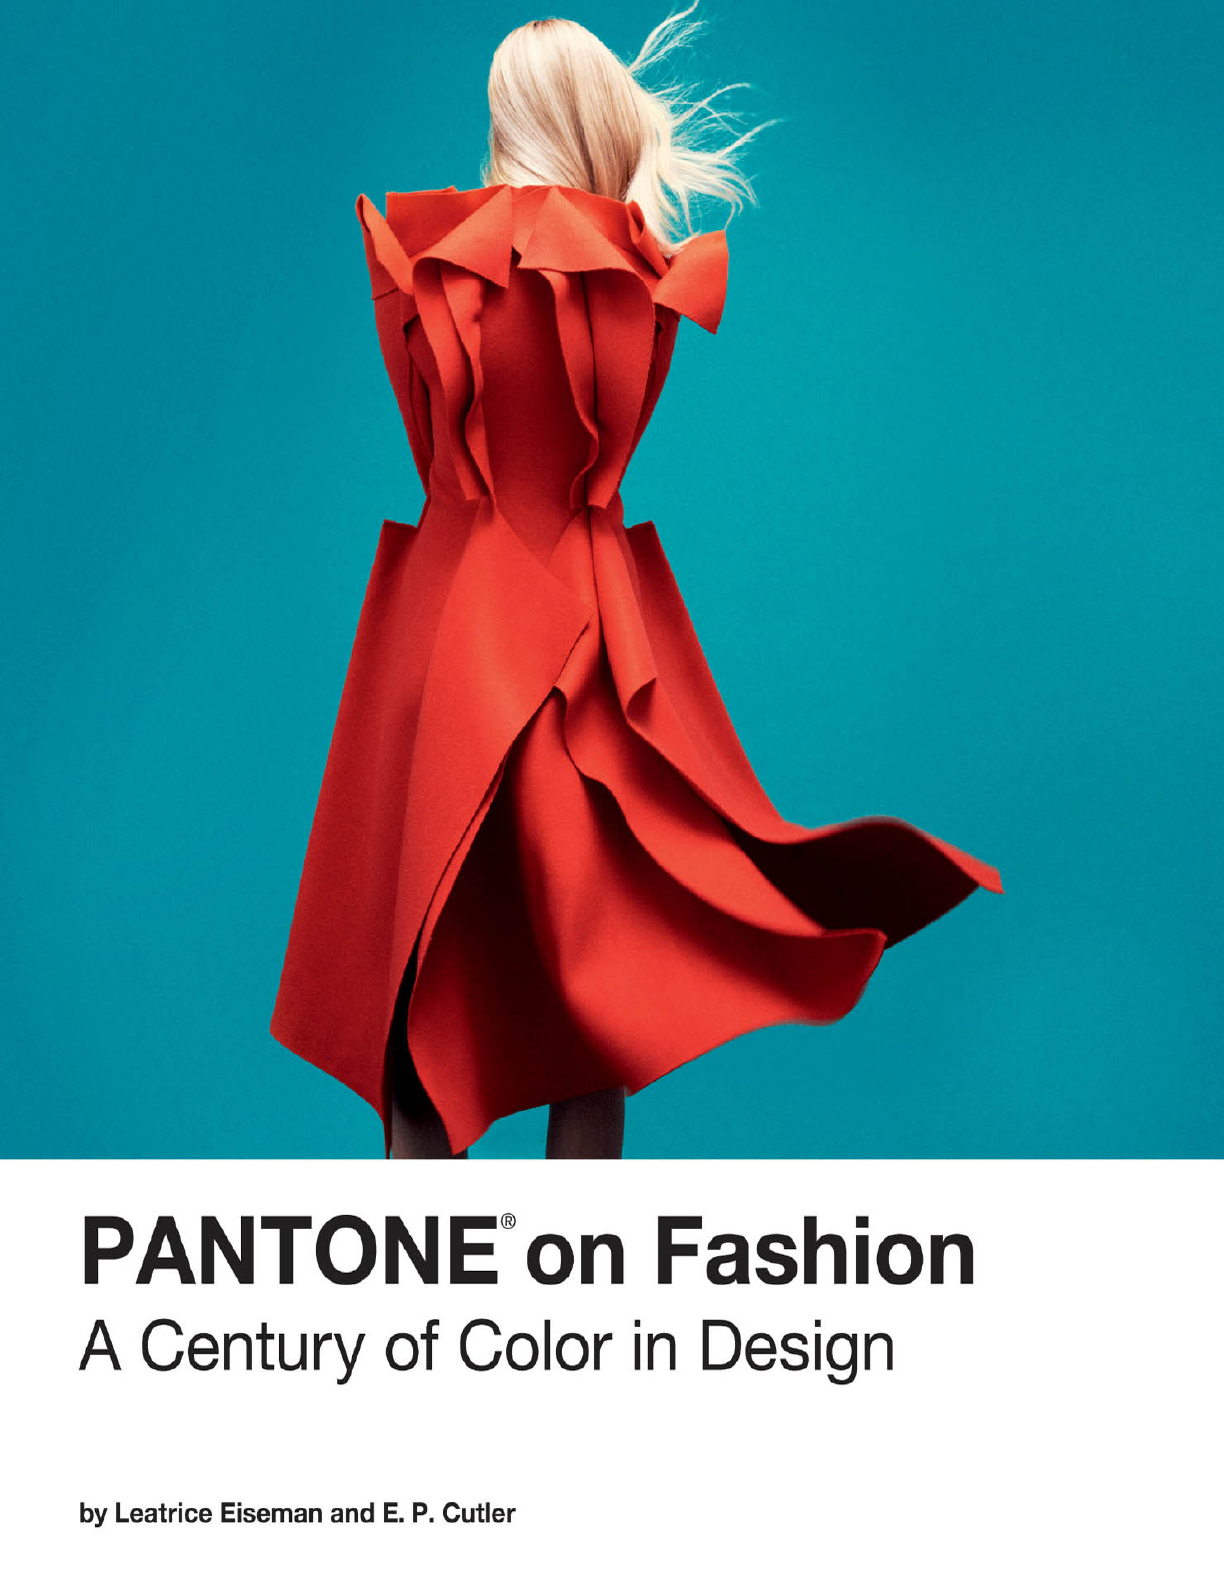 Pantone-on-fashion-a-century-of-color-in-design-by-Leatrice